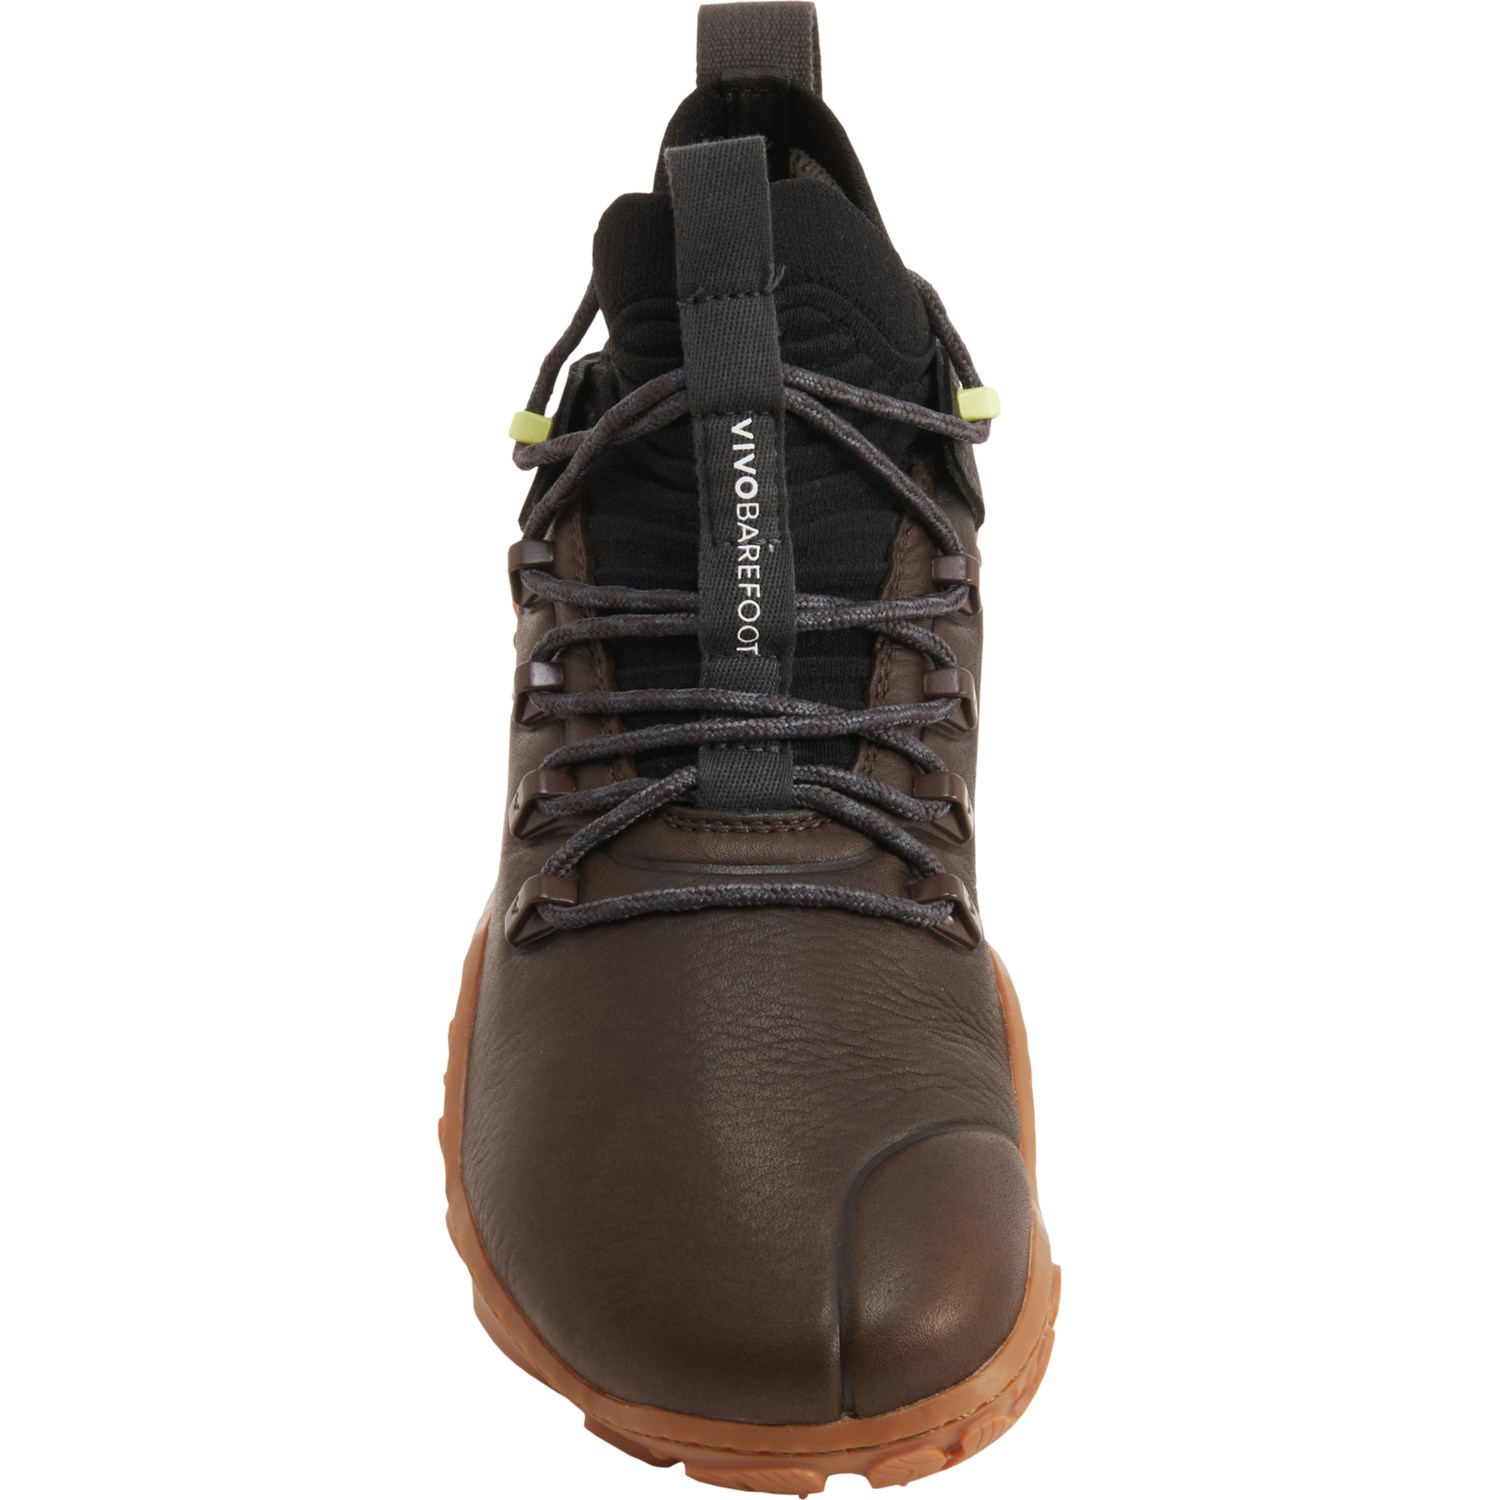 VivoBarefoot Magna Forest ESC Hiking Boots (For Women) - Save 60%